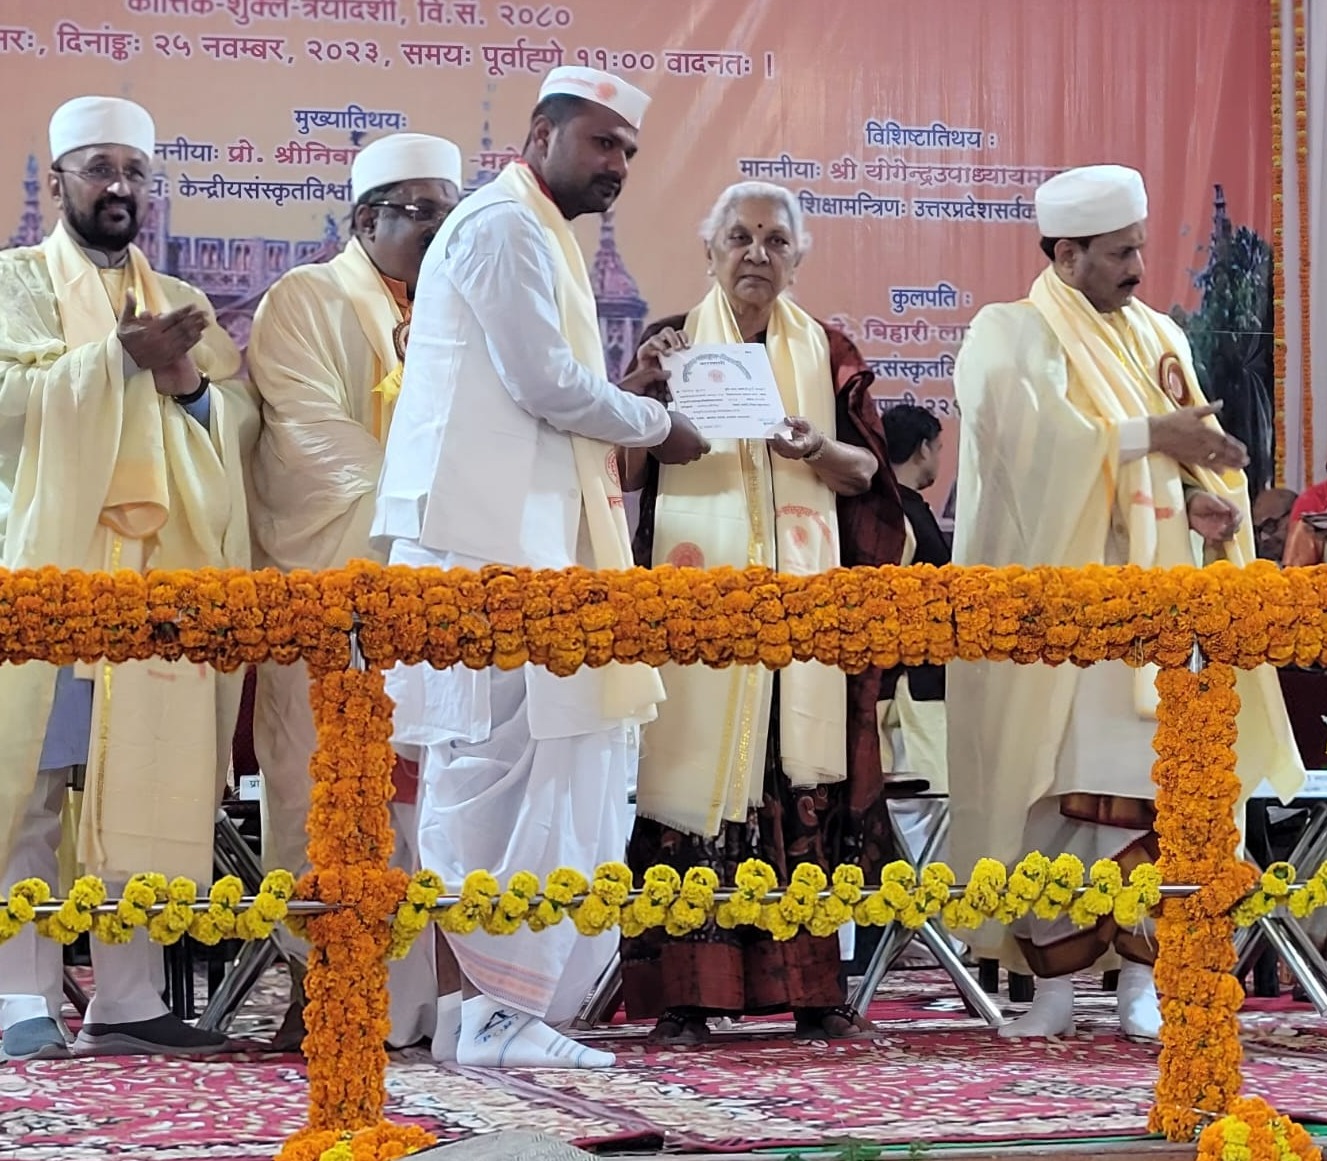 The 41st convocation ceremony of Sampurnanand Sanskrit University, Varanasi concluded under the chairmanship of the Governor.